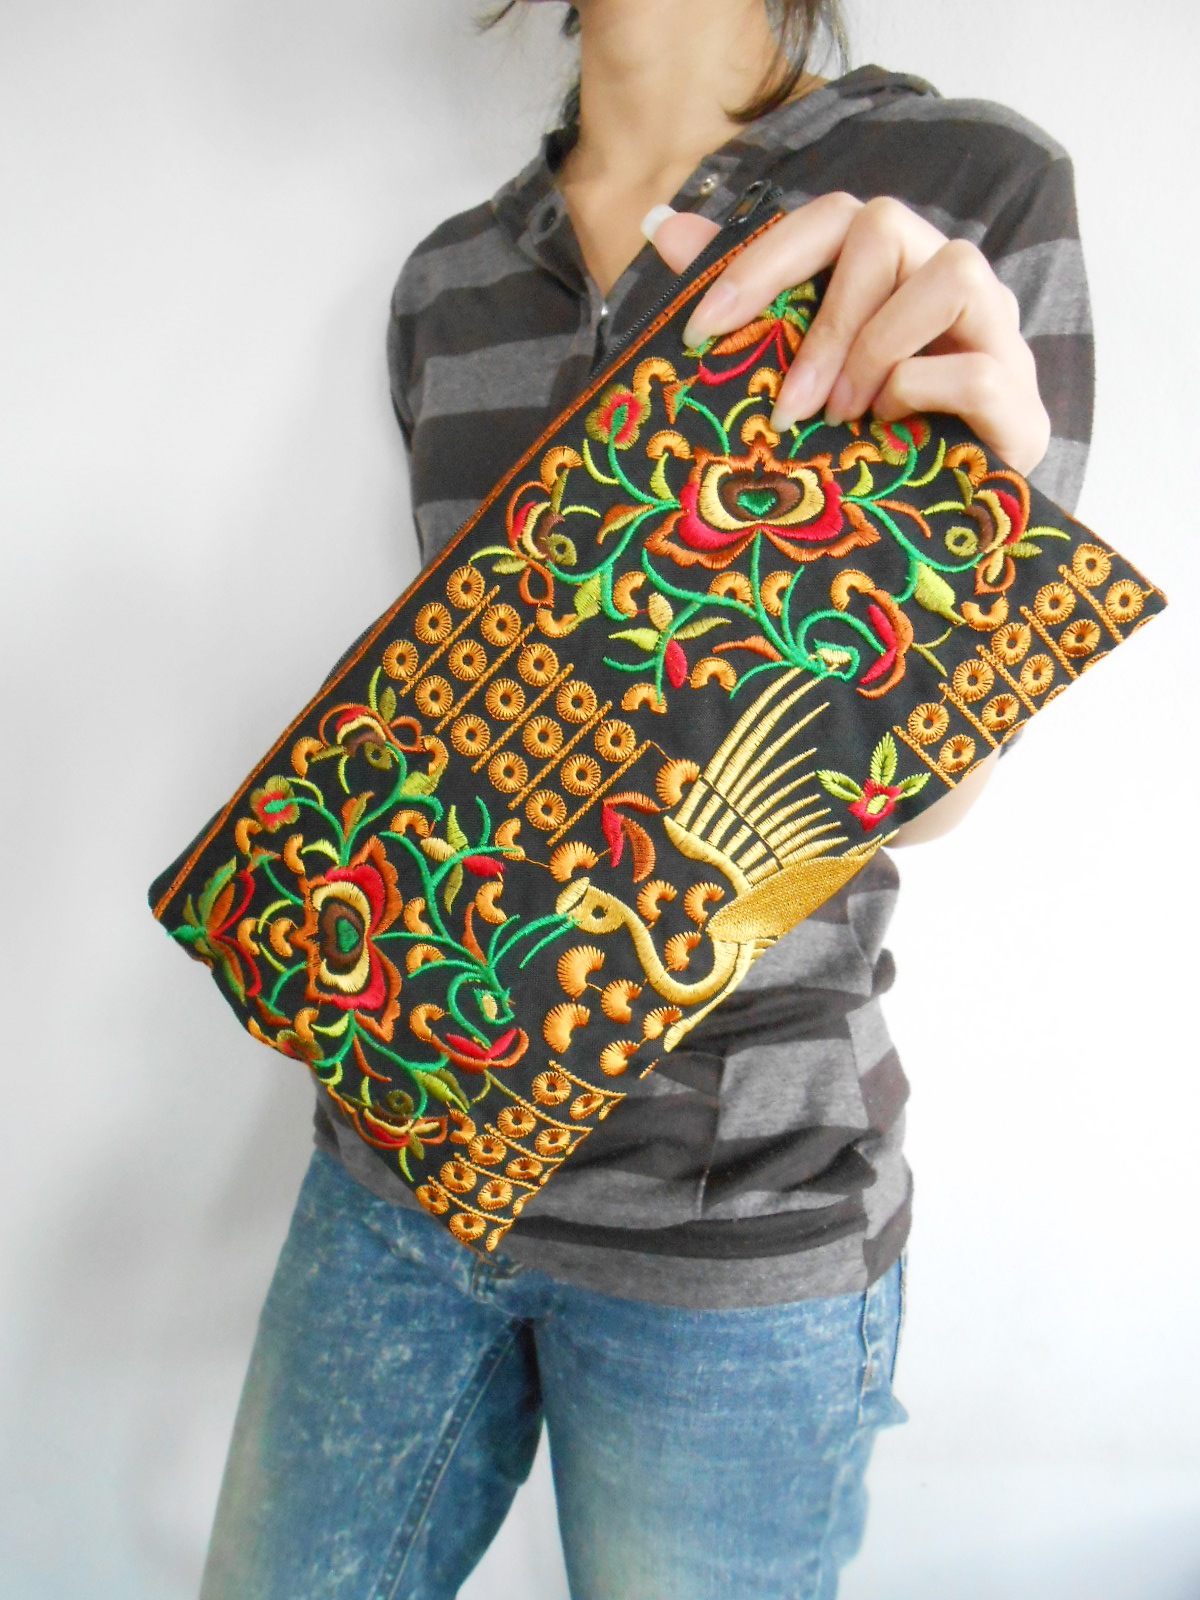 Yellow Flamingo Embroidered Clutch Bag, W/ Black Fabric Chinese Hmong Hilltribe Handmade In Thailand. (kp1056-gobk)